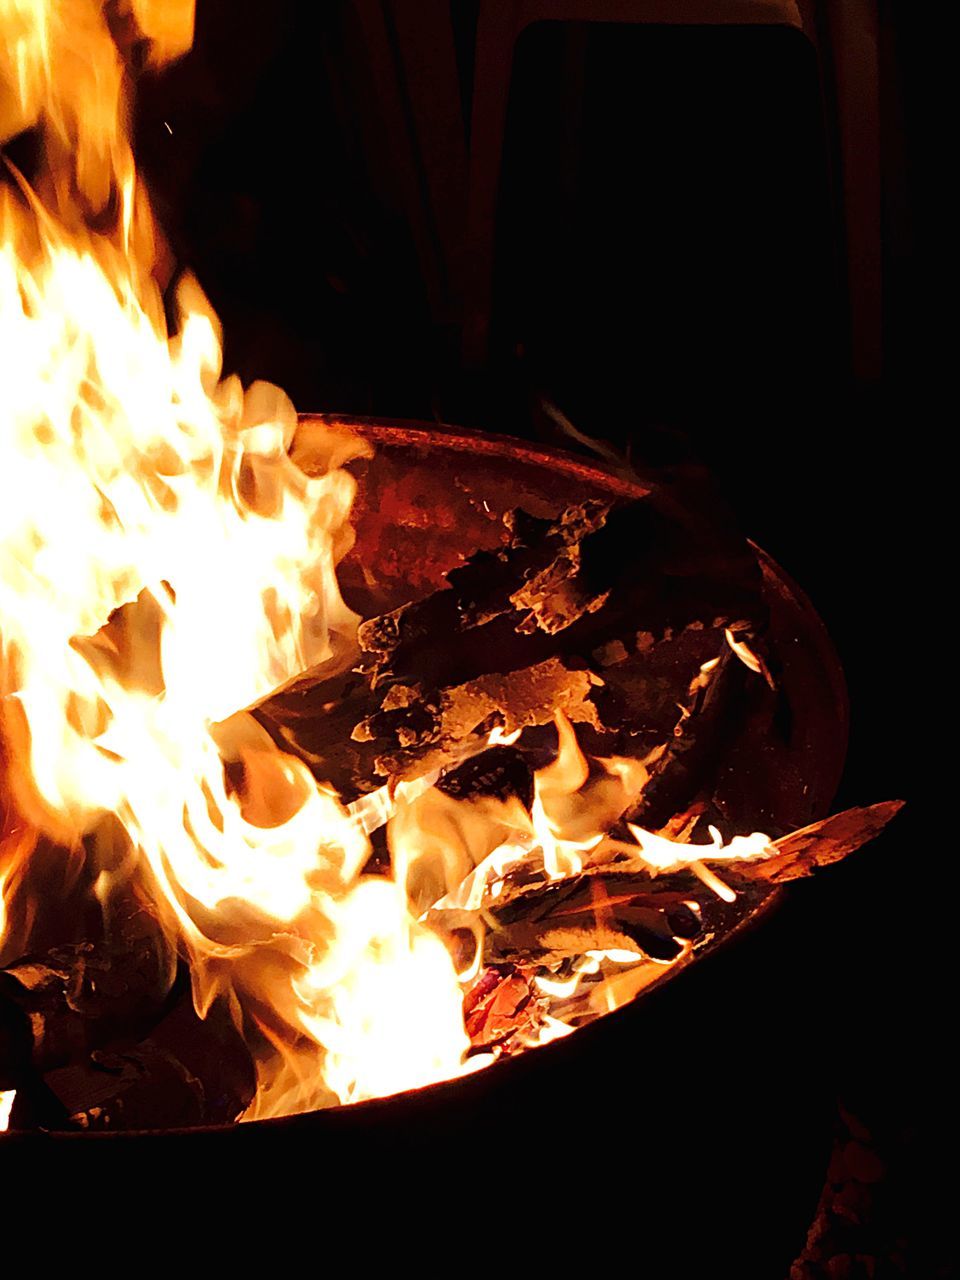 burning, flame, fire - natural phenomenon, heat - temperature, bonfire, glowing, fire, firewood, night, heat, campfire, close-up, orange color, motion, illuminated, dark, no people, fire pit, lit, focus on foreground